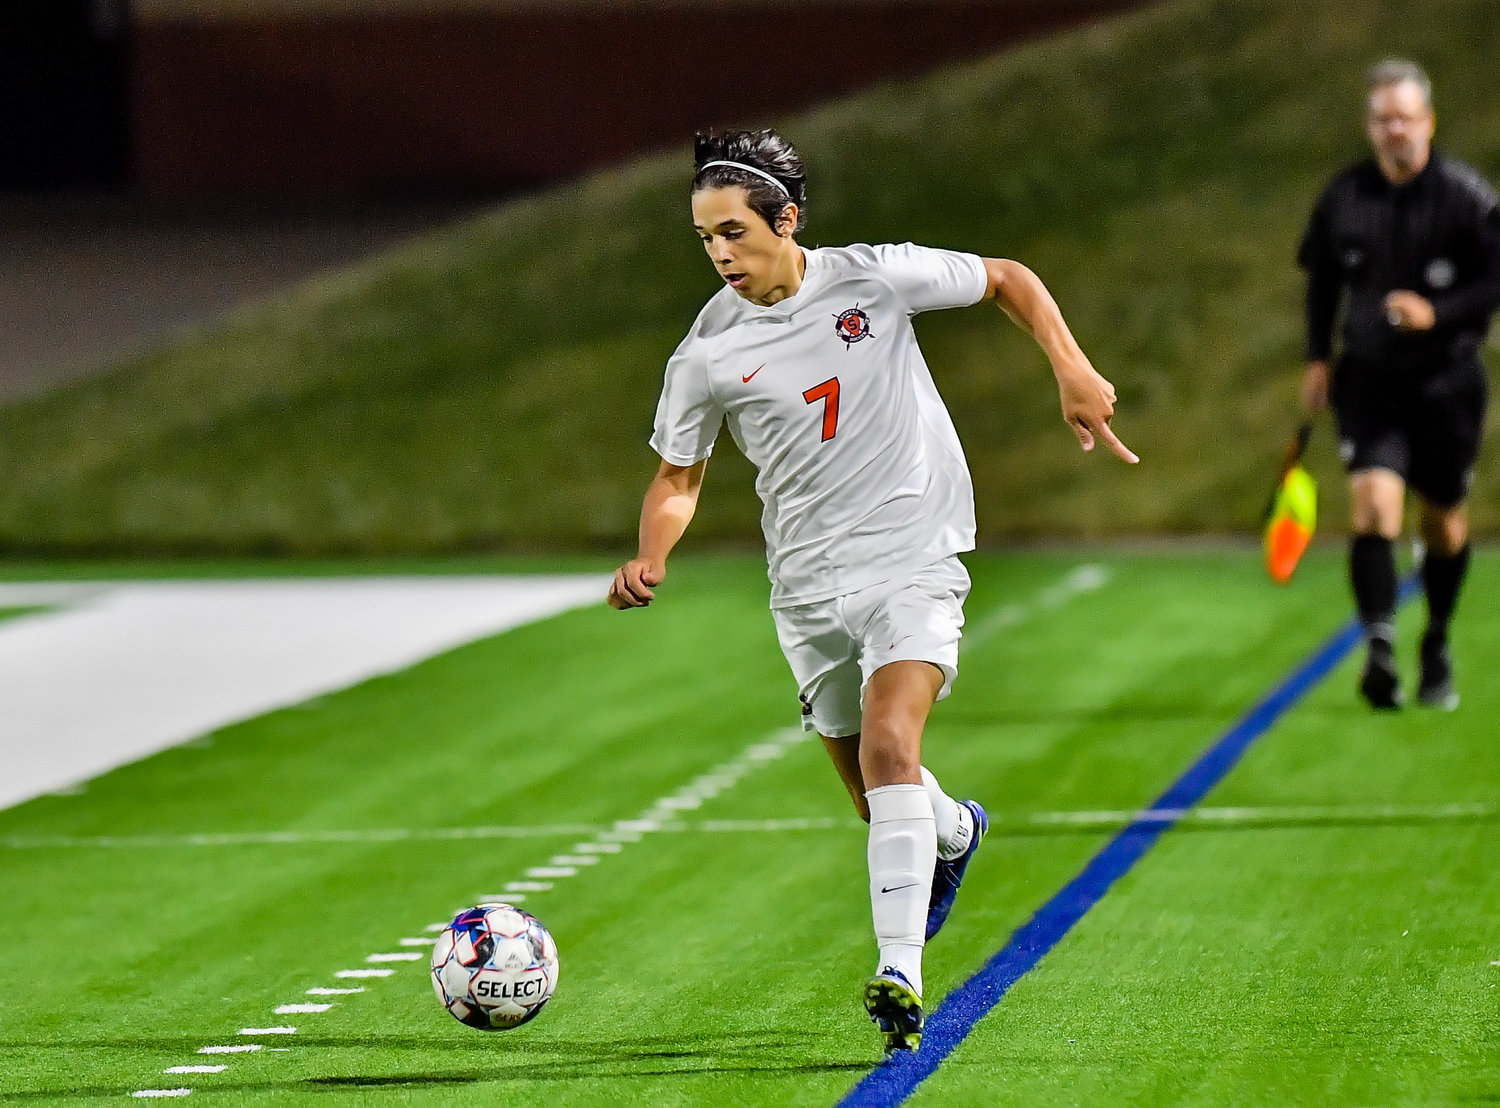 April 1, 2022: Seven Lakes Noa Stasic #7 goes for the ball during Regional Quarterfinal soccer playoff, Seven Lakes vs Katy Taylor at Rhode Stadium. (Photo by Mark Goodman / Katy Times)